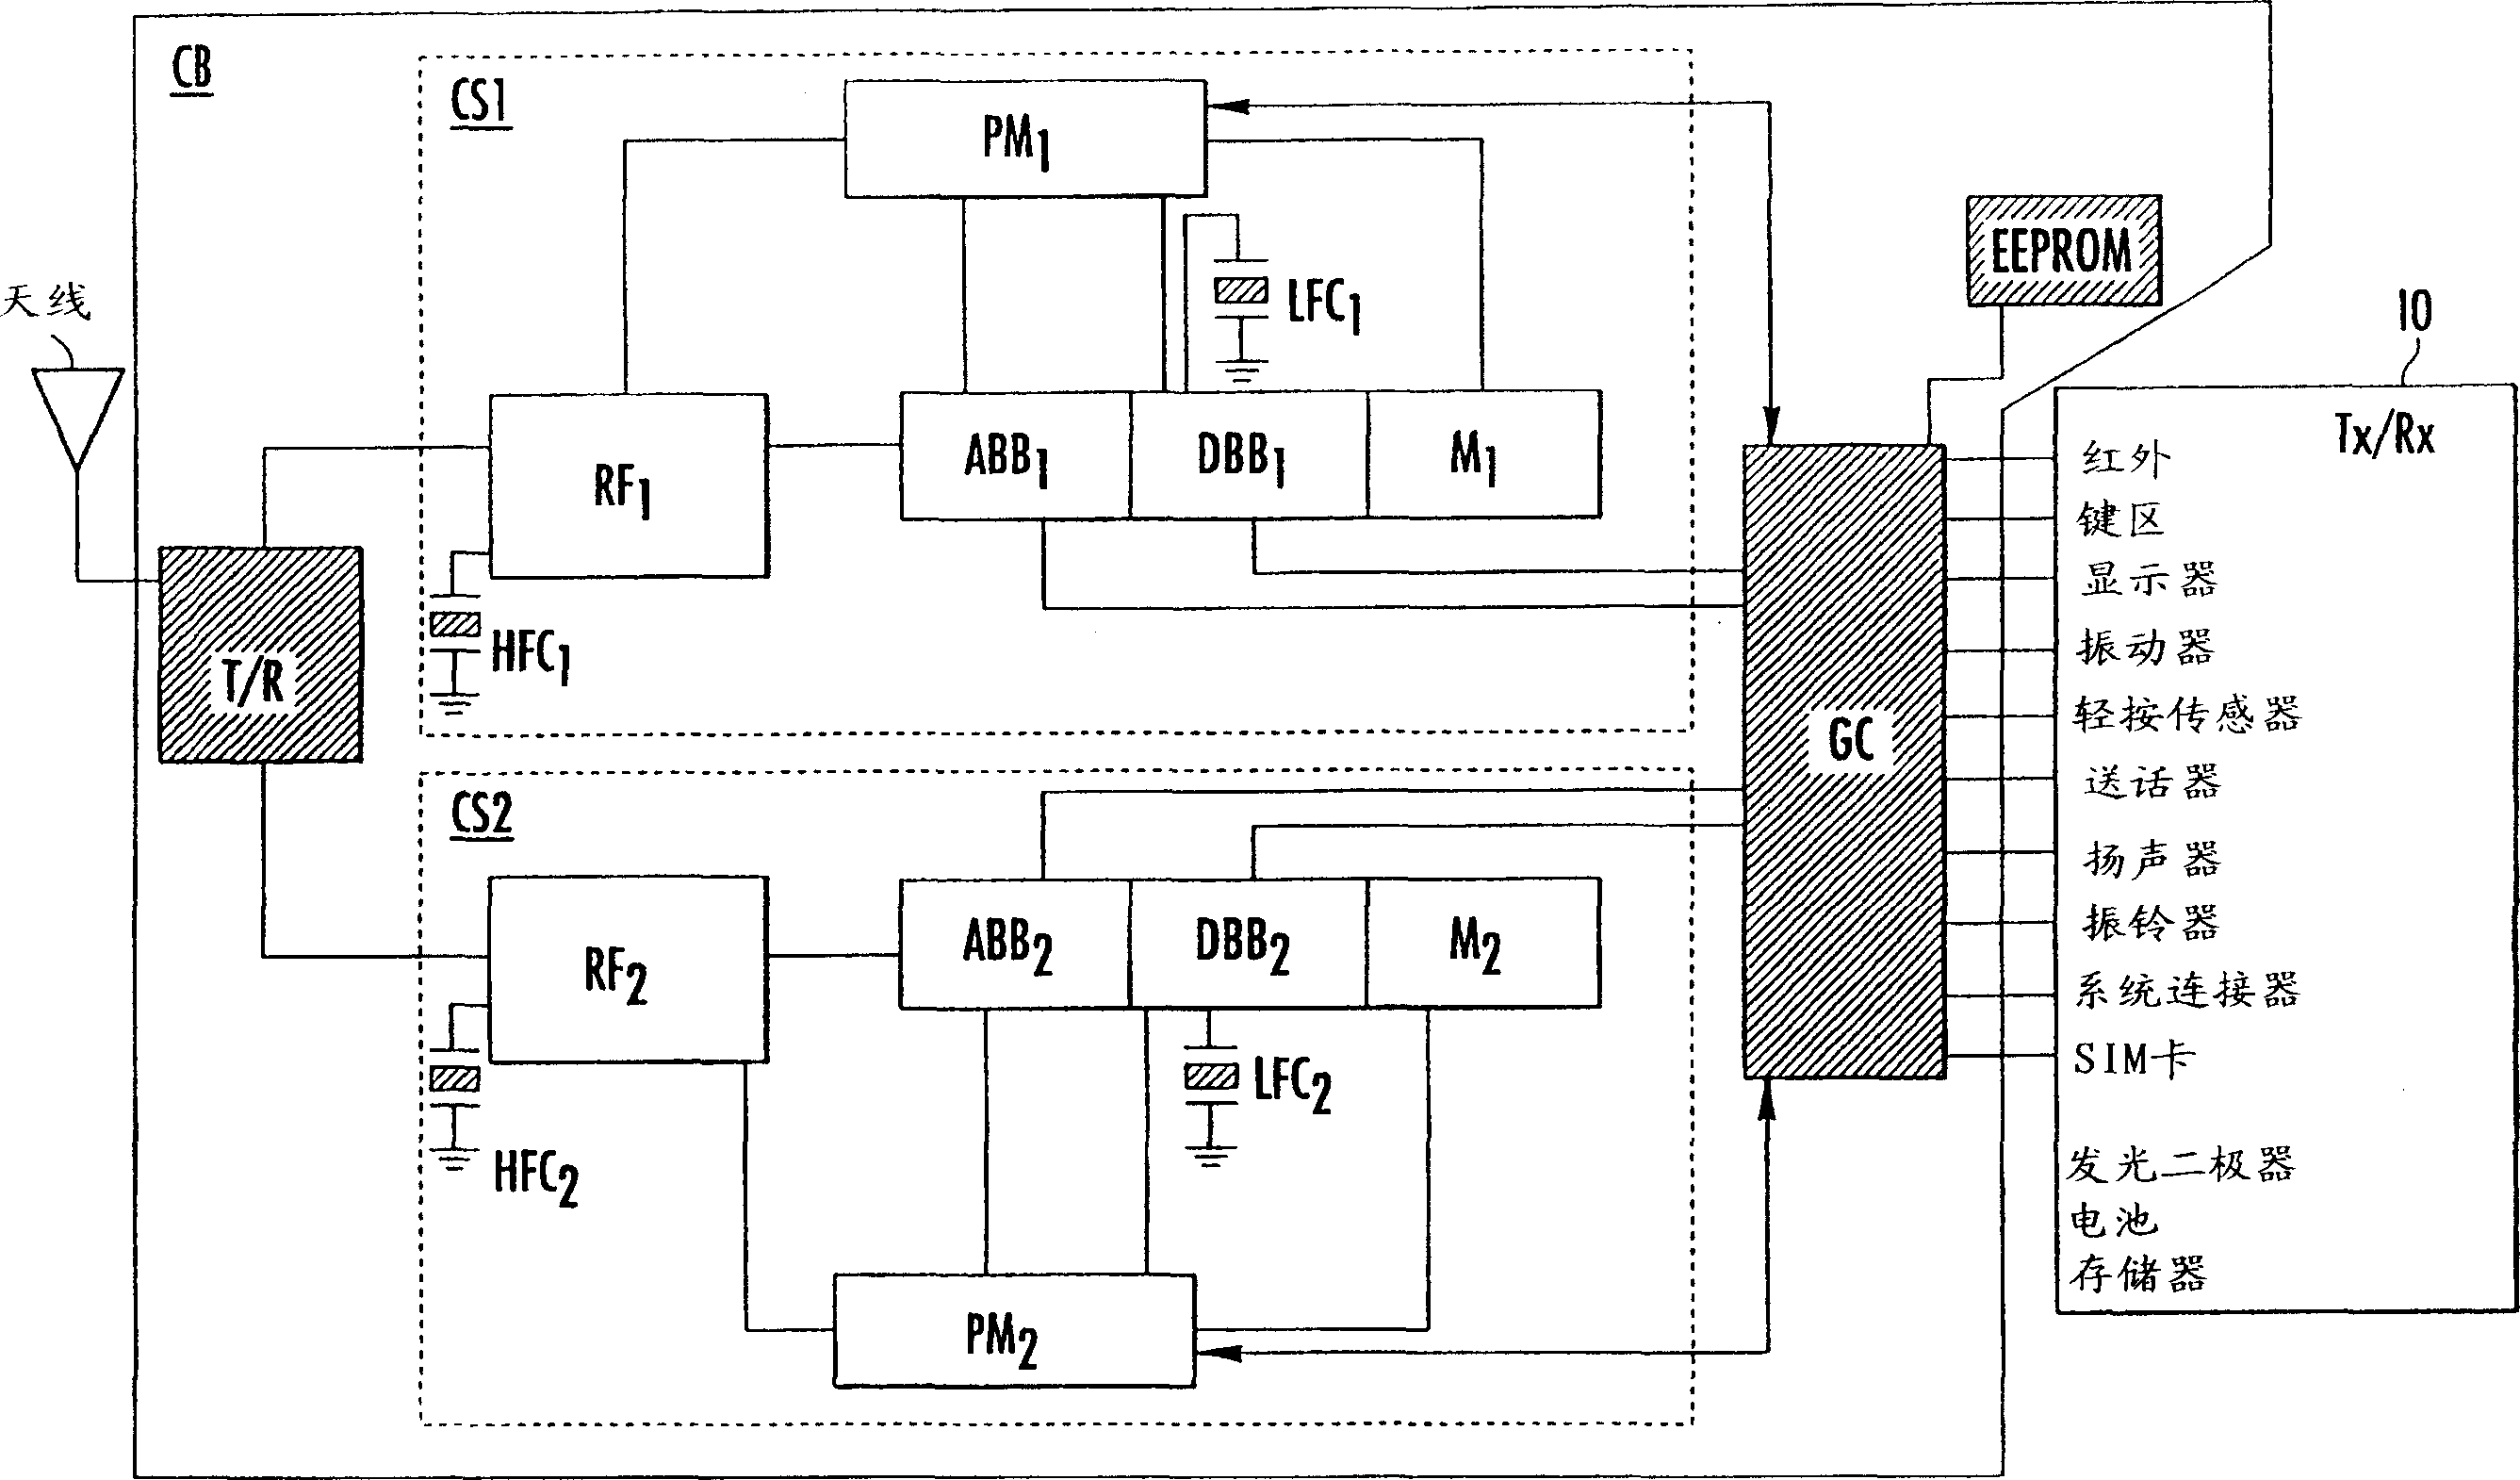 Multi-mode radiotelephone including glue circuits and related methods and circuits